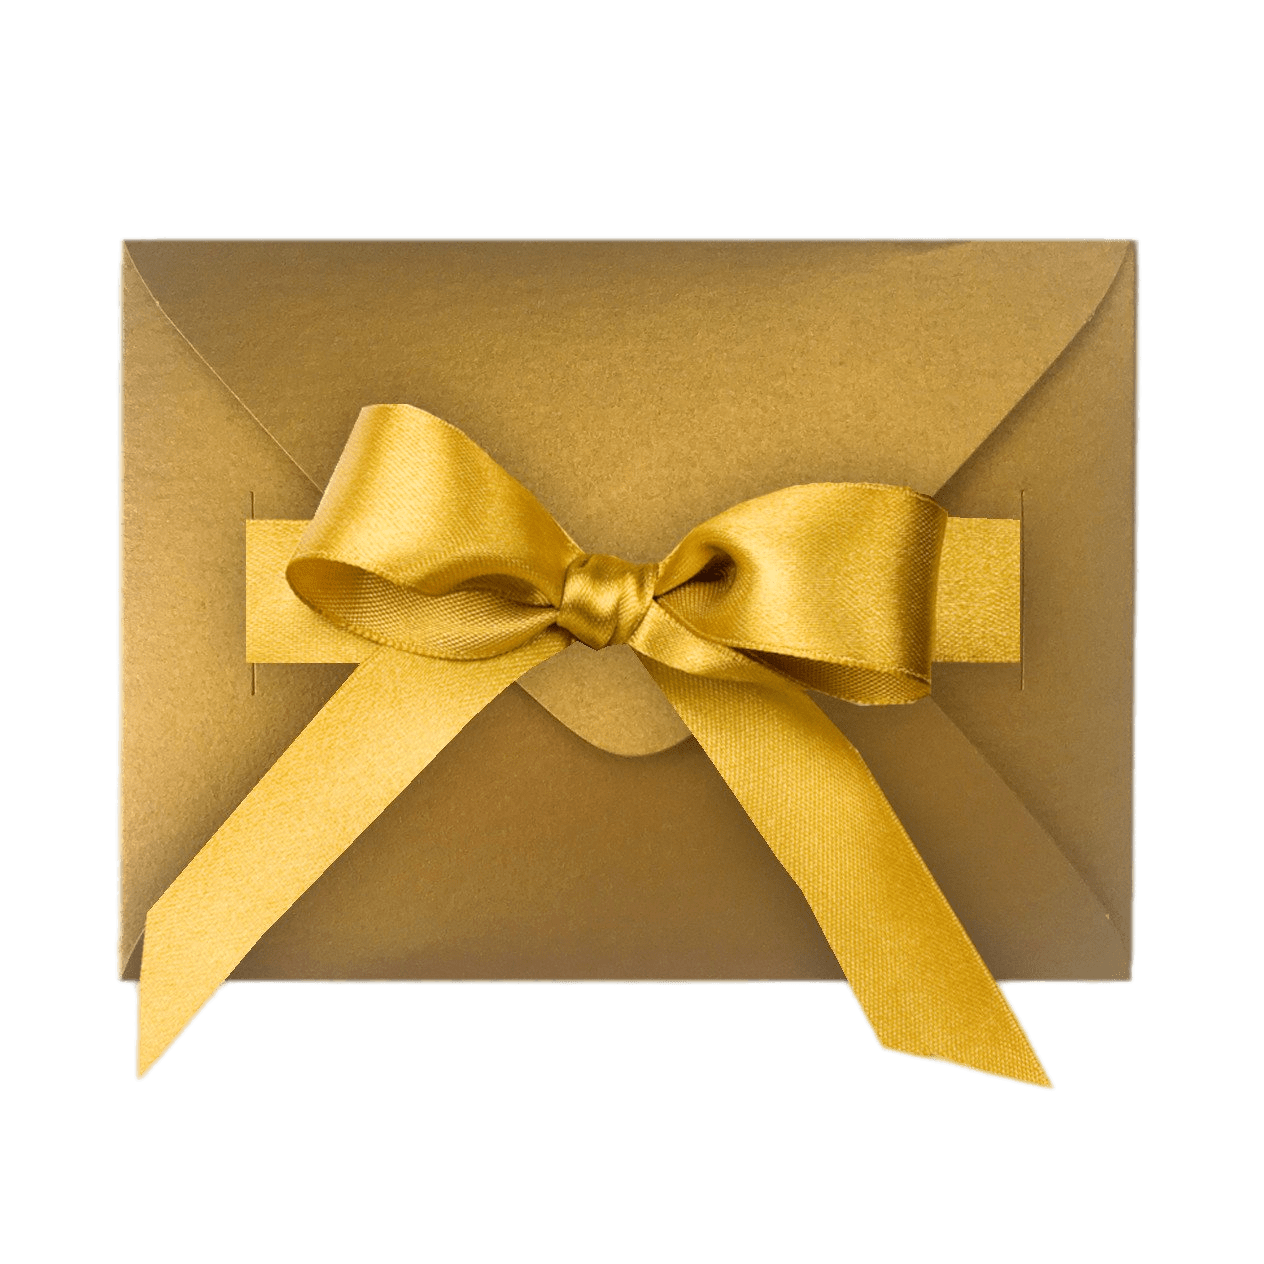 Gift Gold HQ Image Free PNG Image